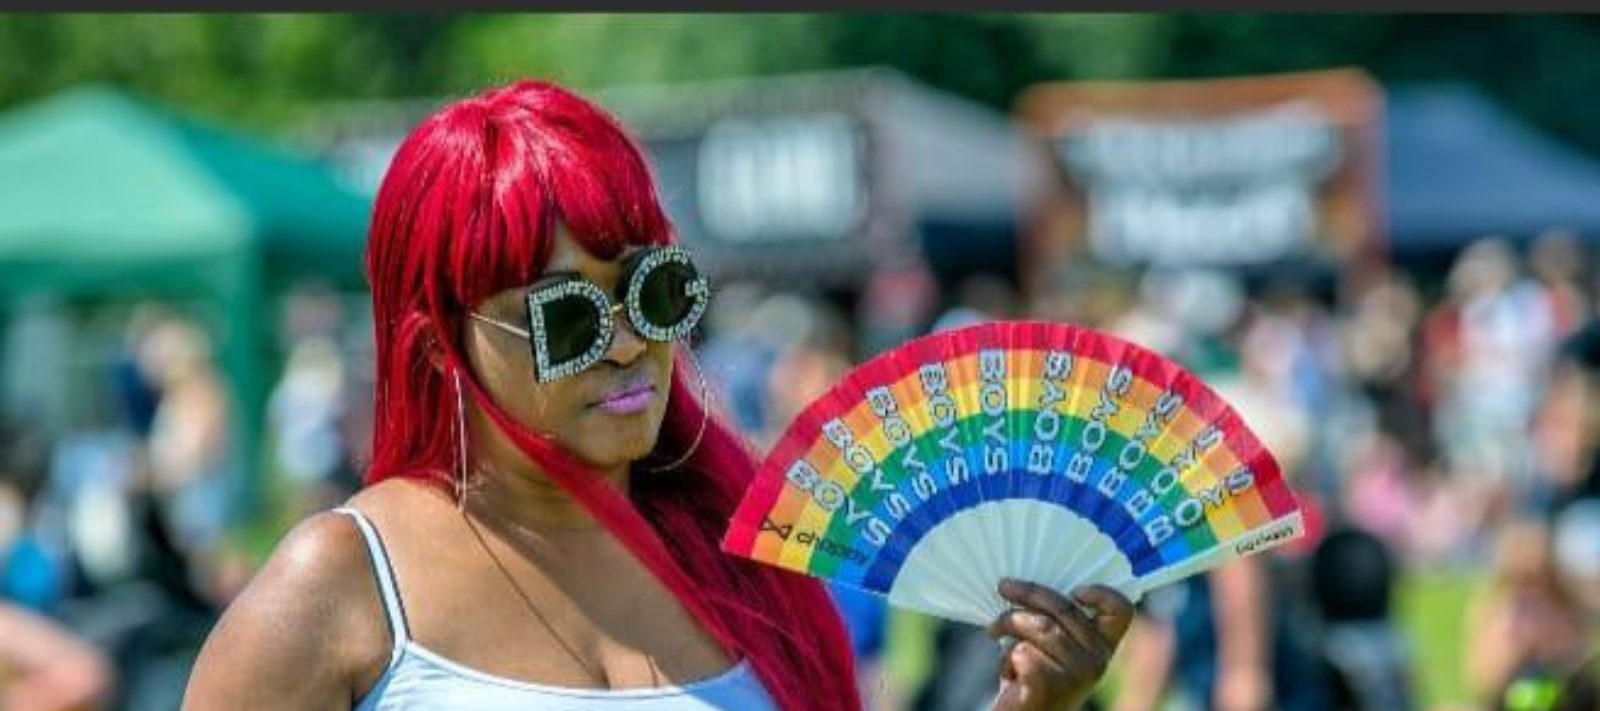 A black woman with long, red-orange hair, wears a white vest top and sunglasses. She is holding a fan coloured with the rainbow like the LGBT+ flag.